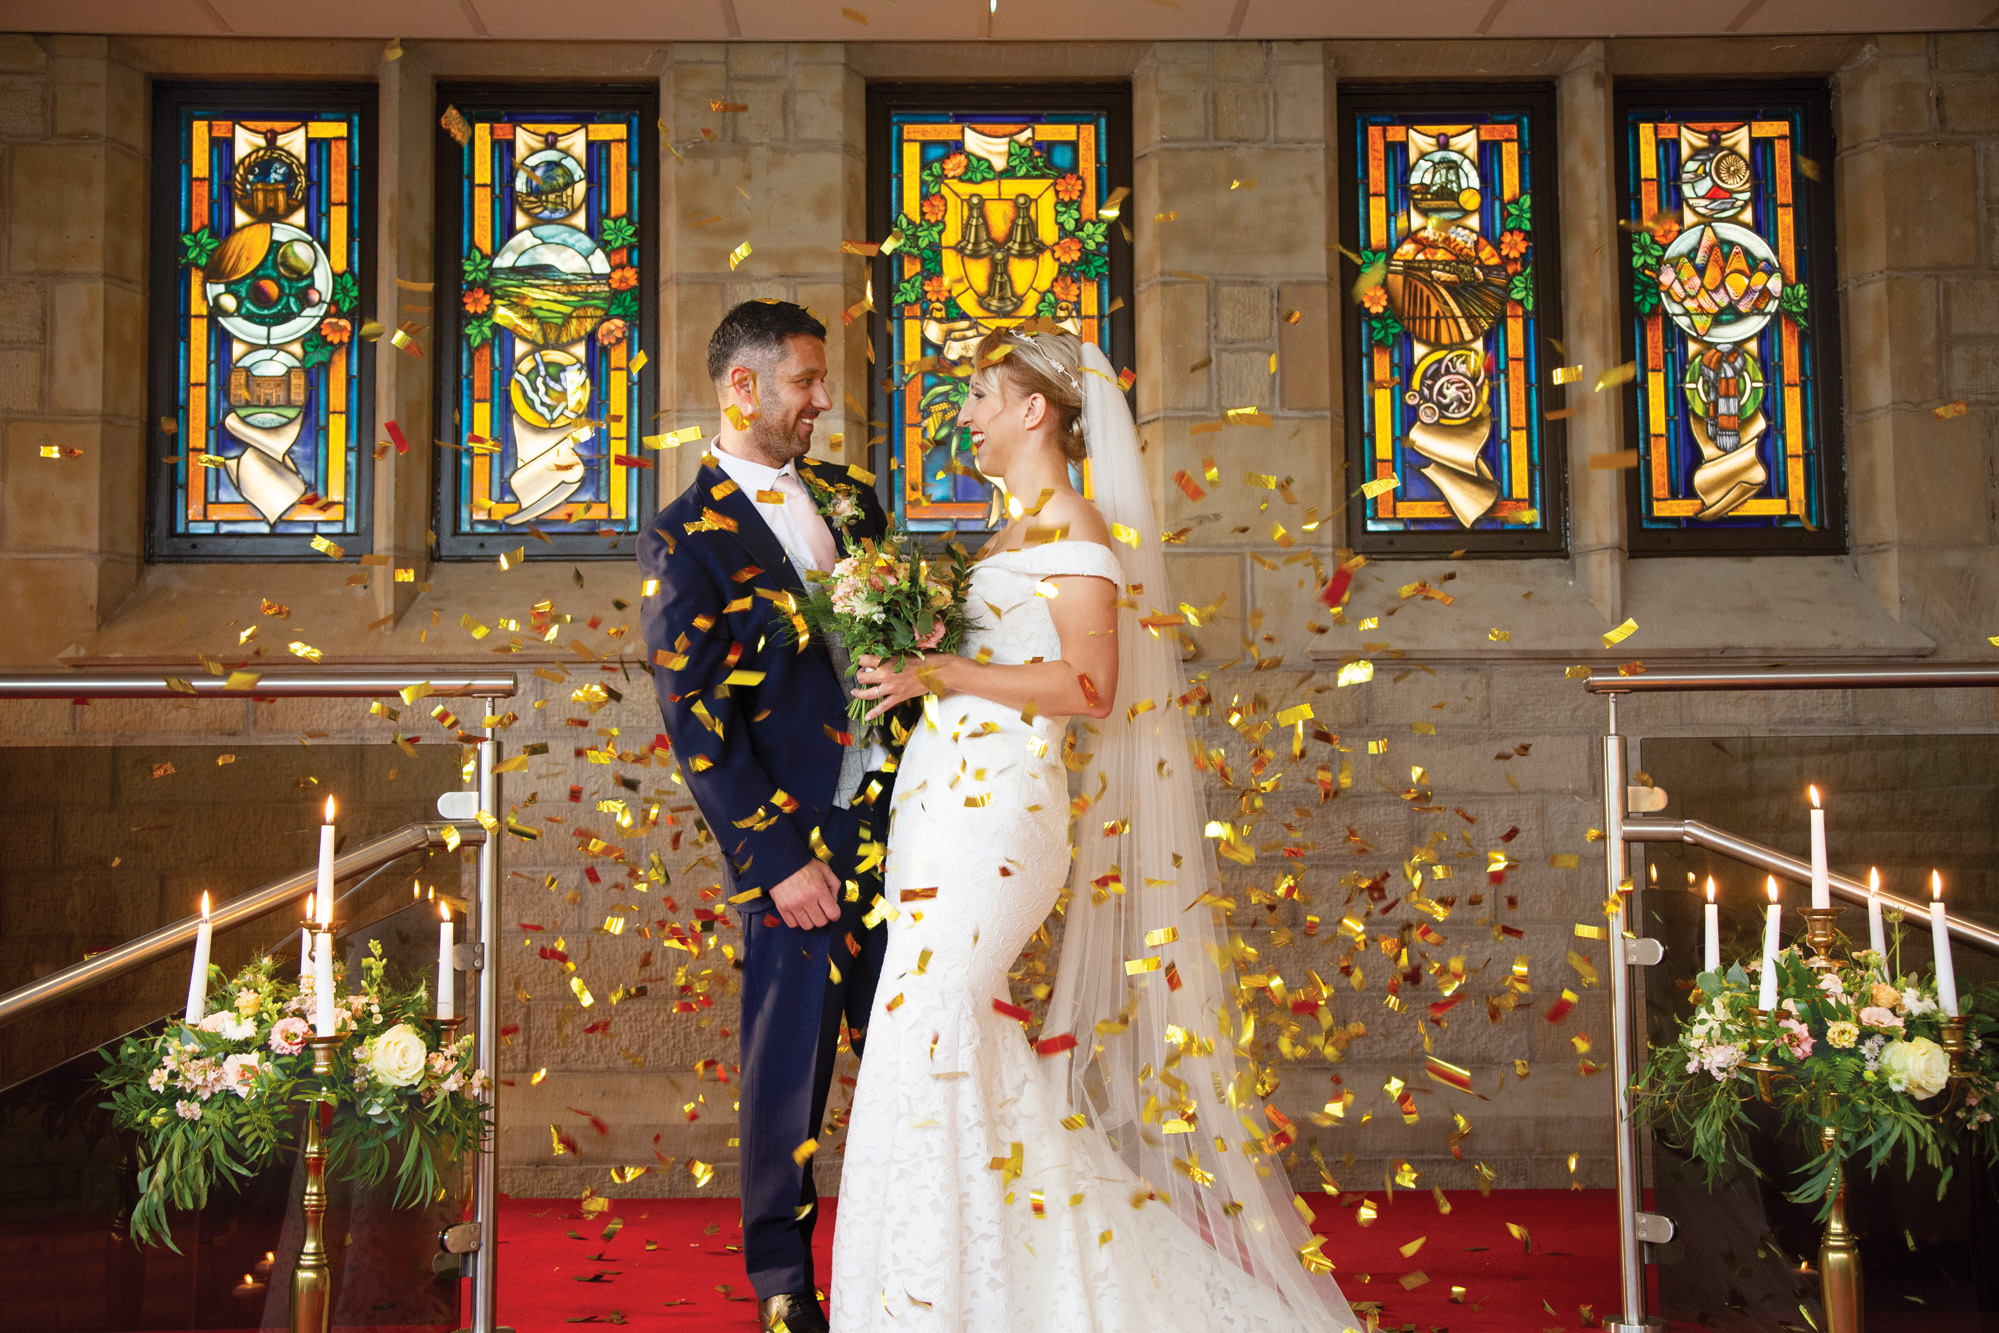 Enjoy a Valentine’s Day to remember and book your dream wedding at The Landmark’s Great Hall!